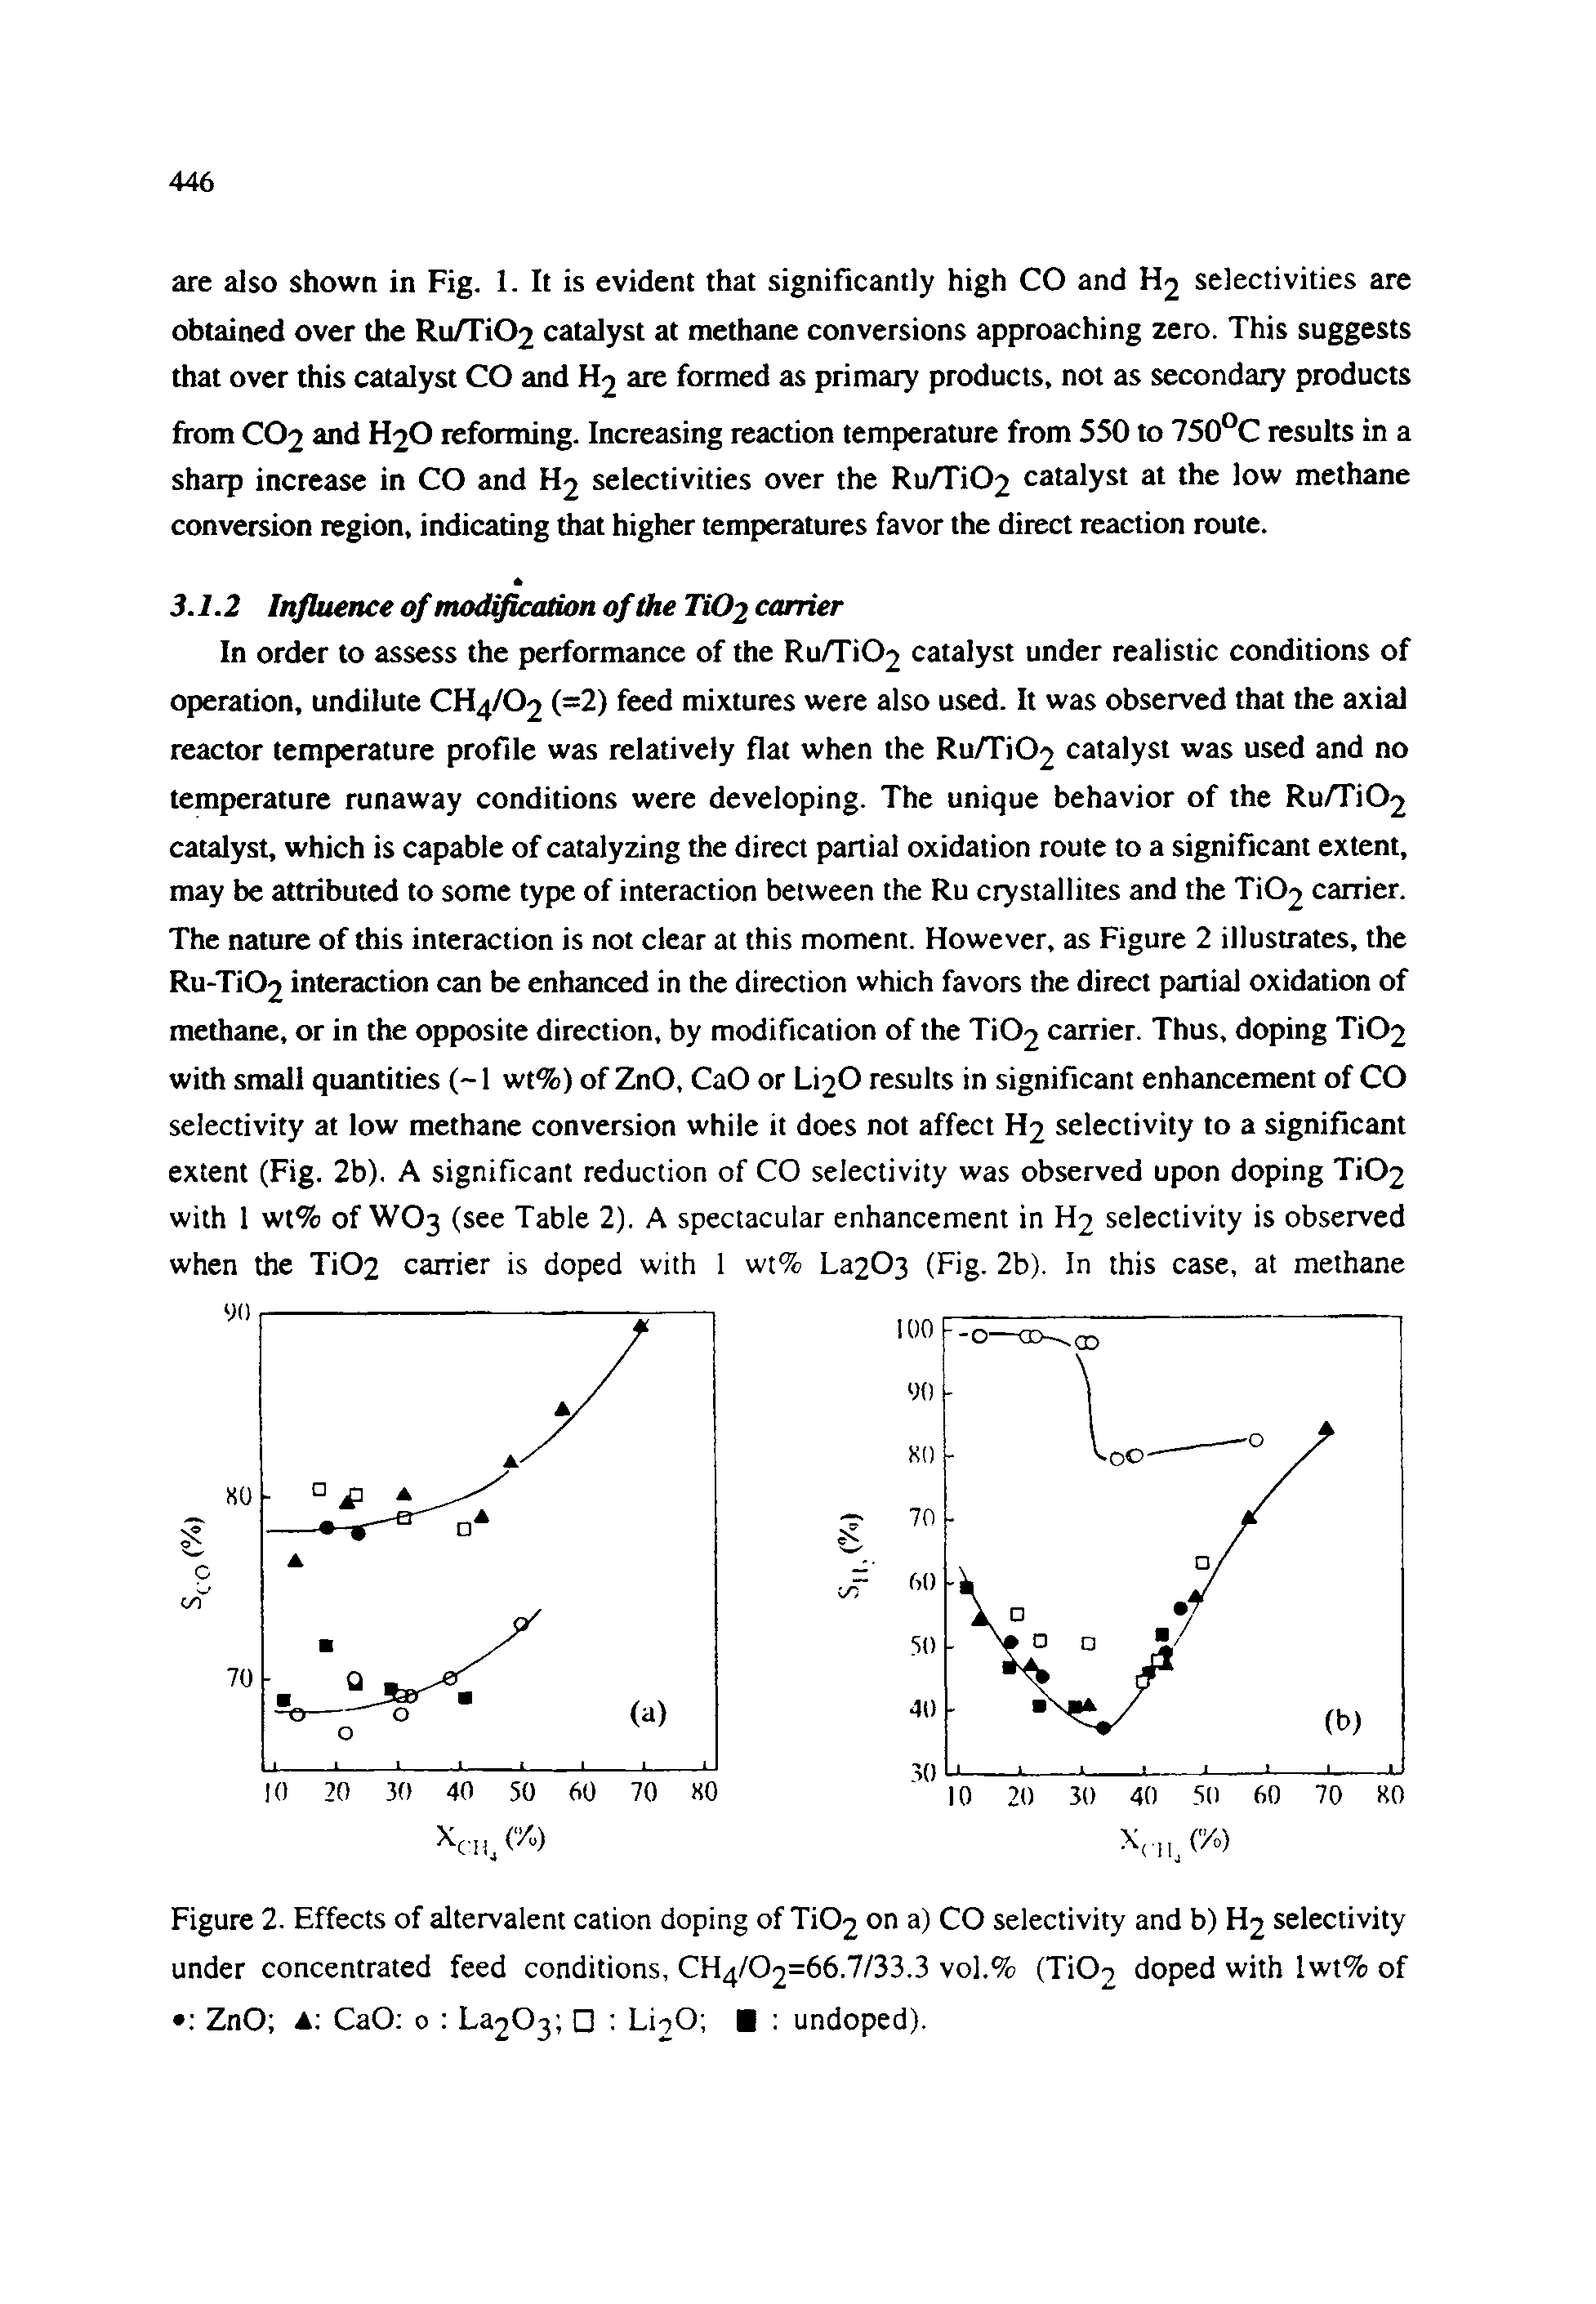 Figure 2. Effects of altervalent cation doping of Ti02 on a) CO selectivity and b) H2 selectivity under concentrated feed conditions, CH4/02=66.7/33.3 vol.% (Ti02 doped with lwt% of ZnO A CaO 0 La203 Li O undoped).